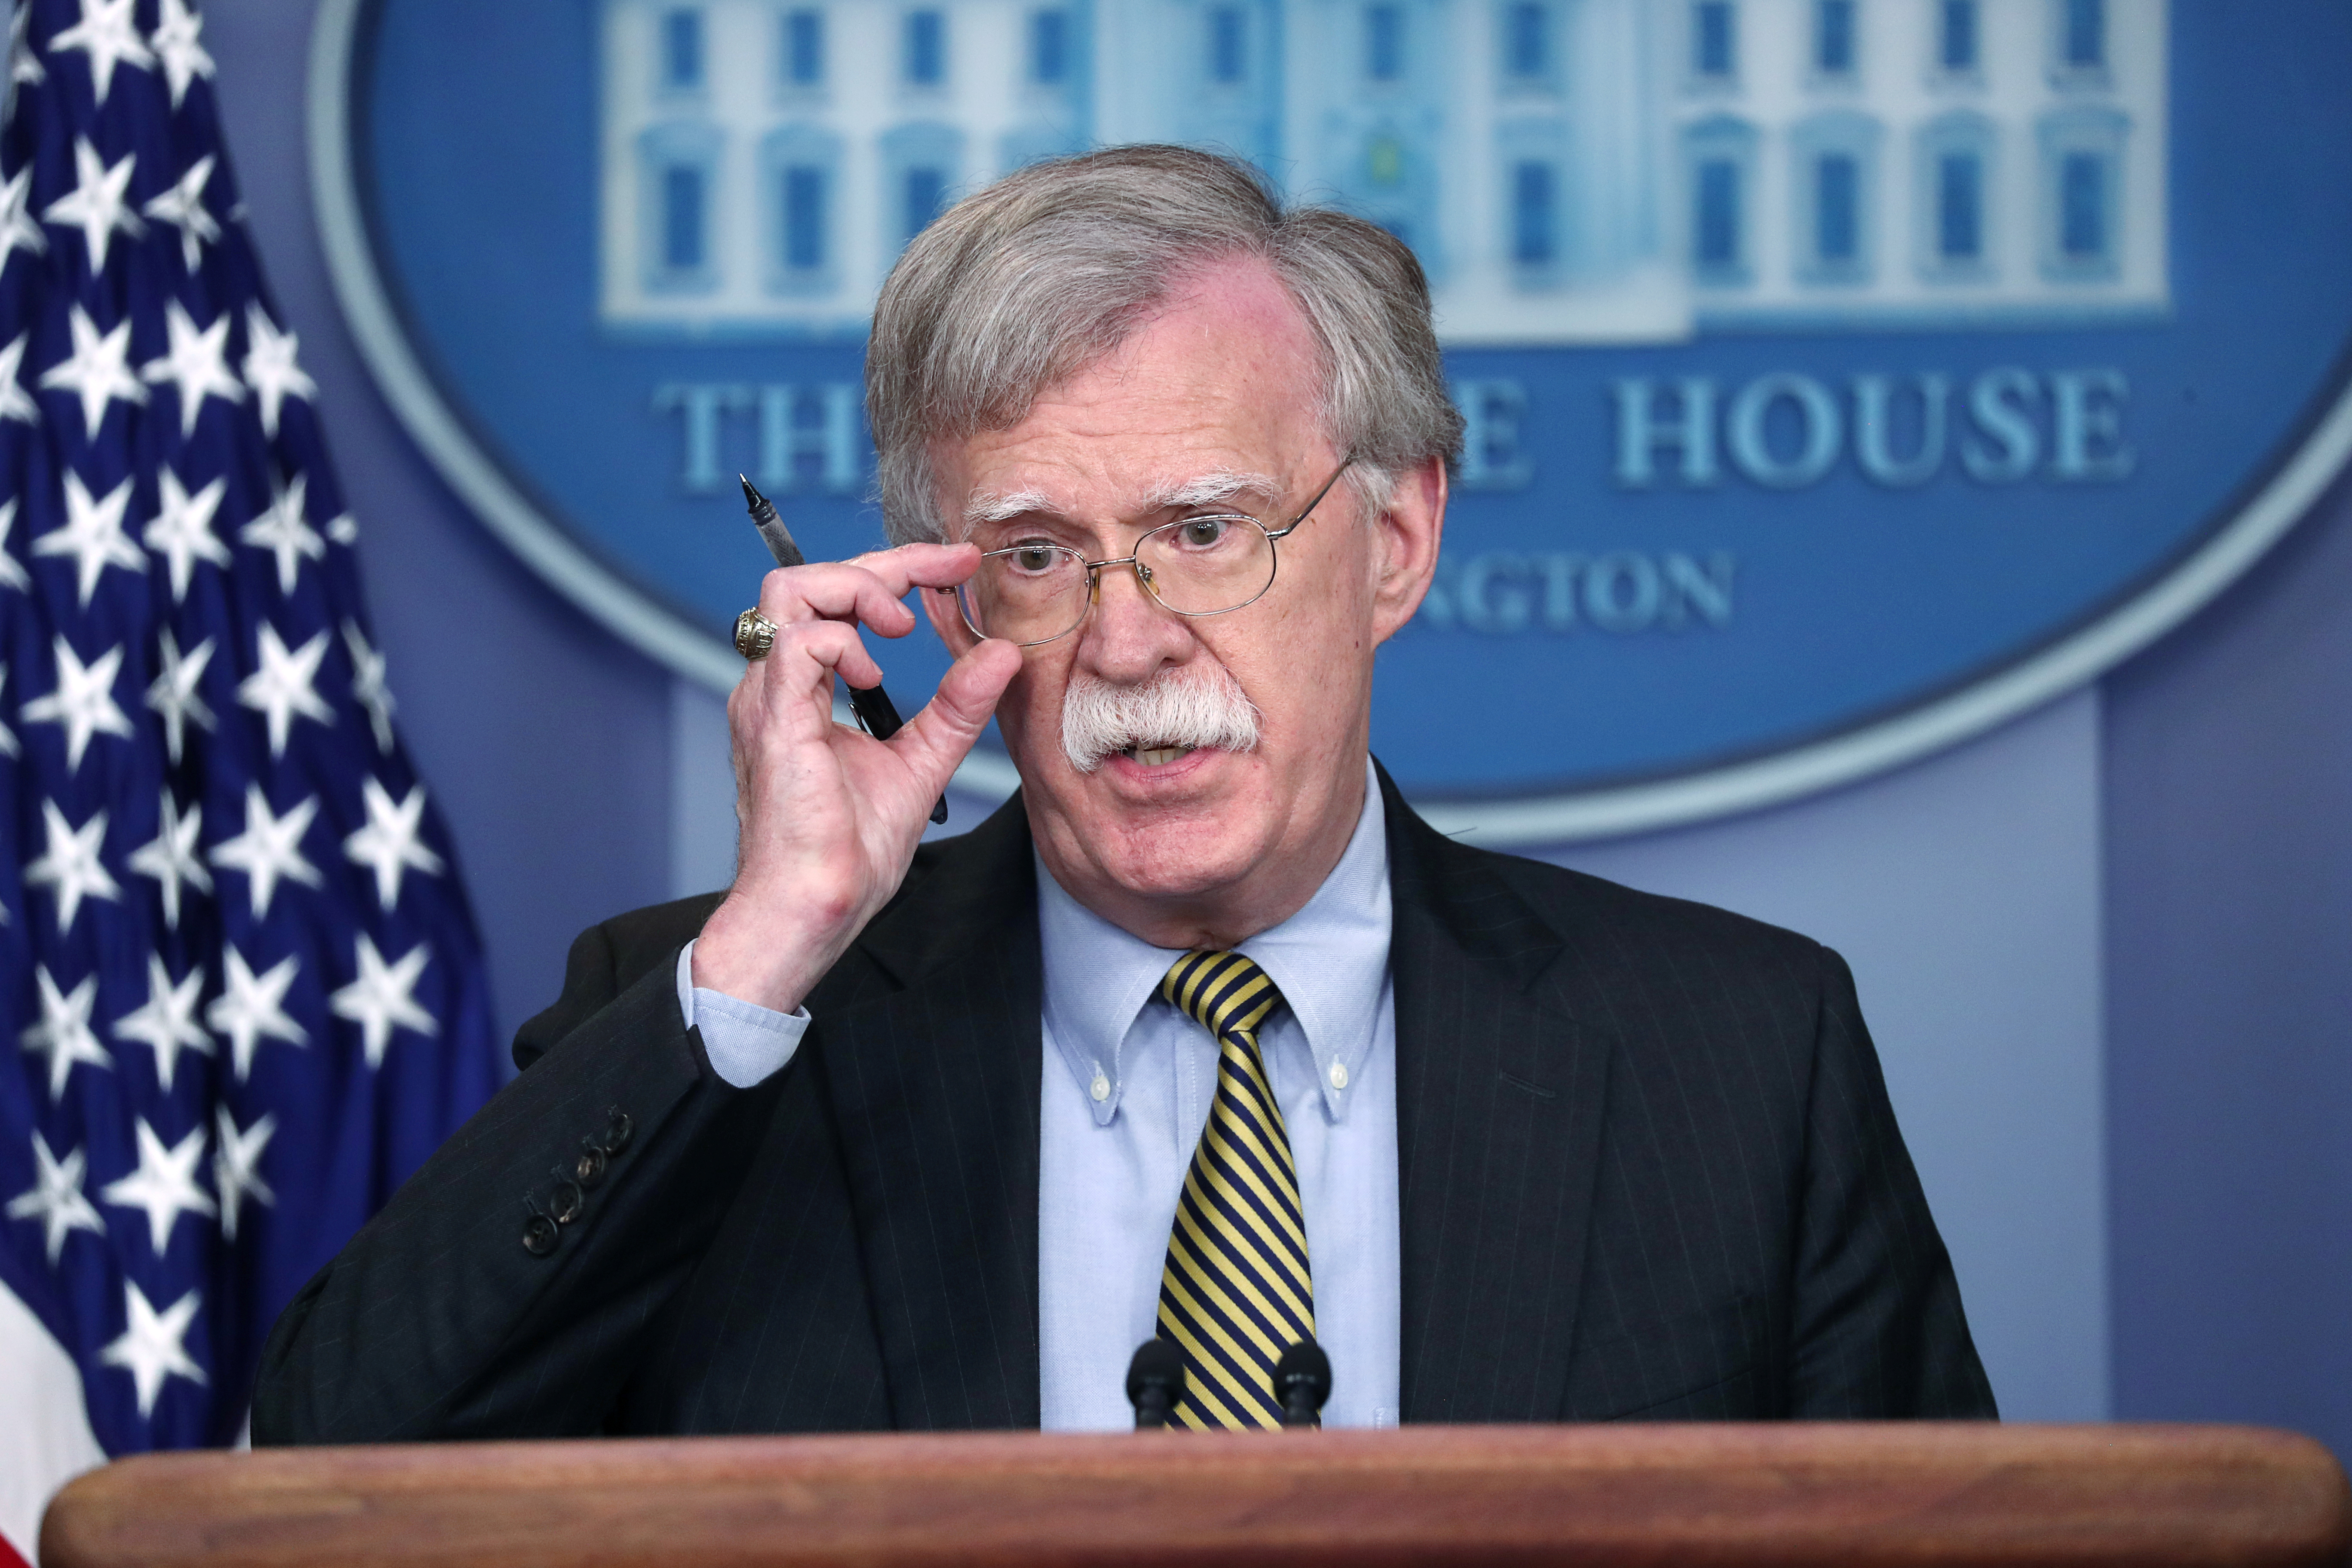 U.S. National Security Advisor Bolton speaks to reporters about Iran in the White House briefing room in Washington